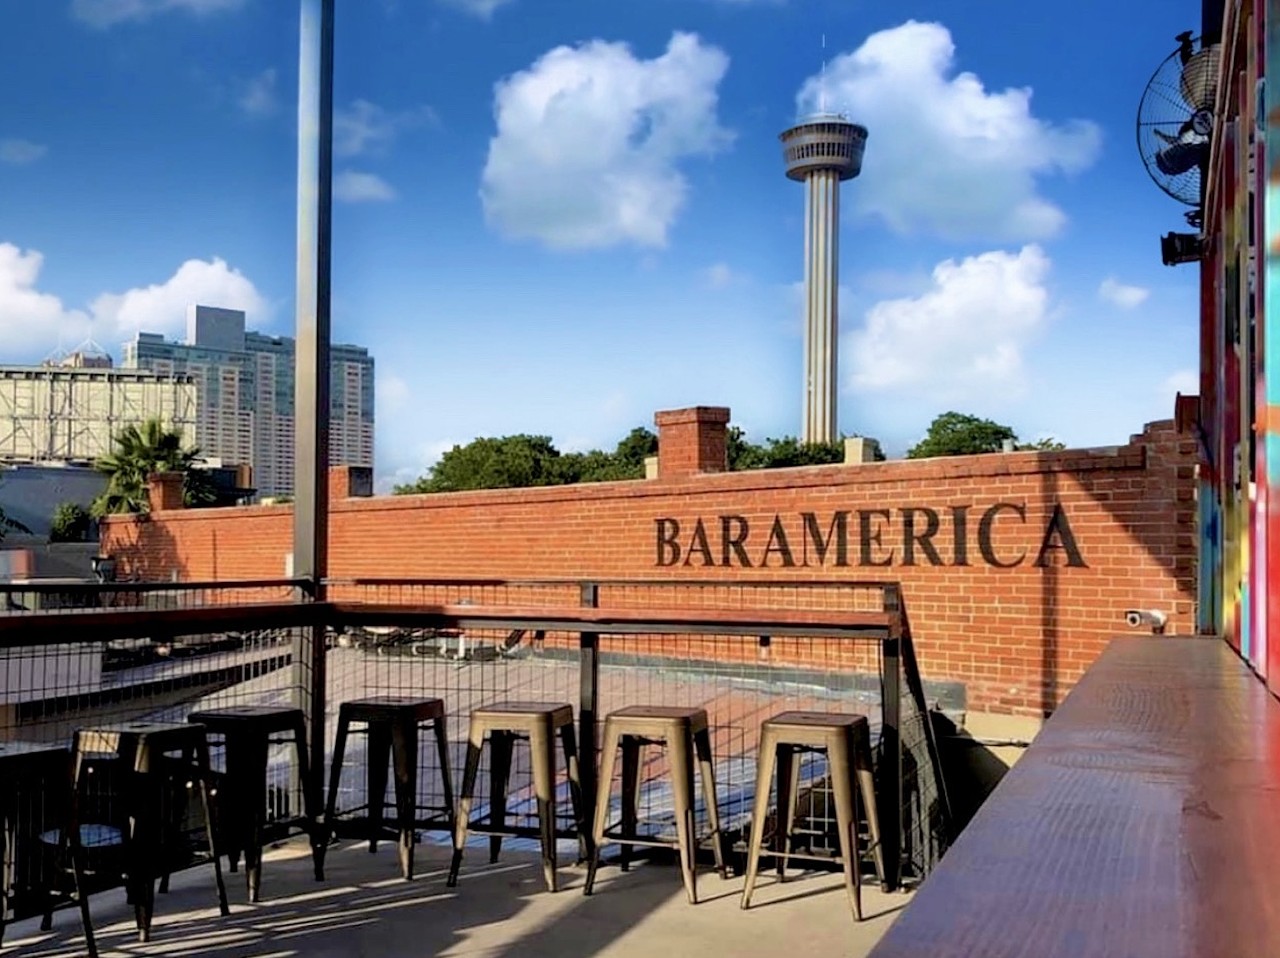 Bar America
723 S. Alamo St., (210) 281-5945, facebook.com/baramericasatx
Though the establishment first opened its doors in 1942, Bar America’s rooftop patio was only added in 2019 — a thrilling addition to the Southtown staple, which is known for its old-school vibes.